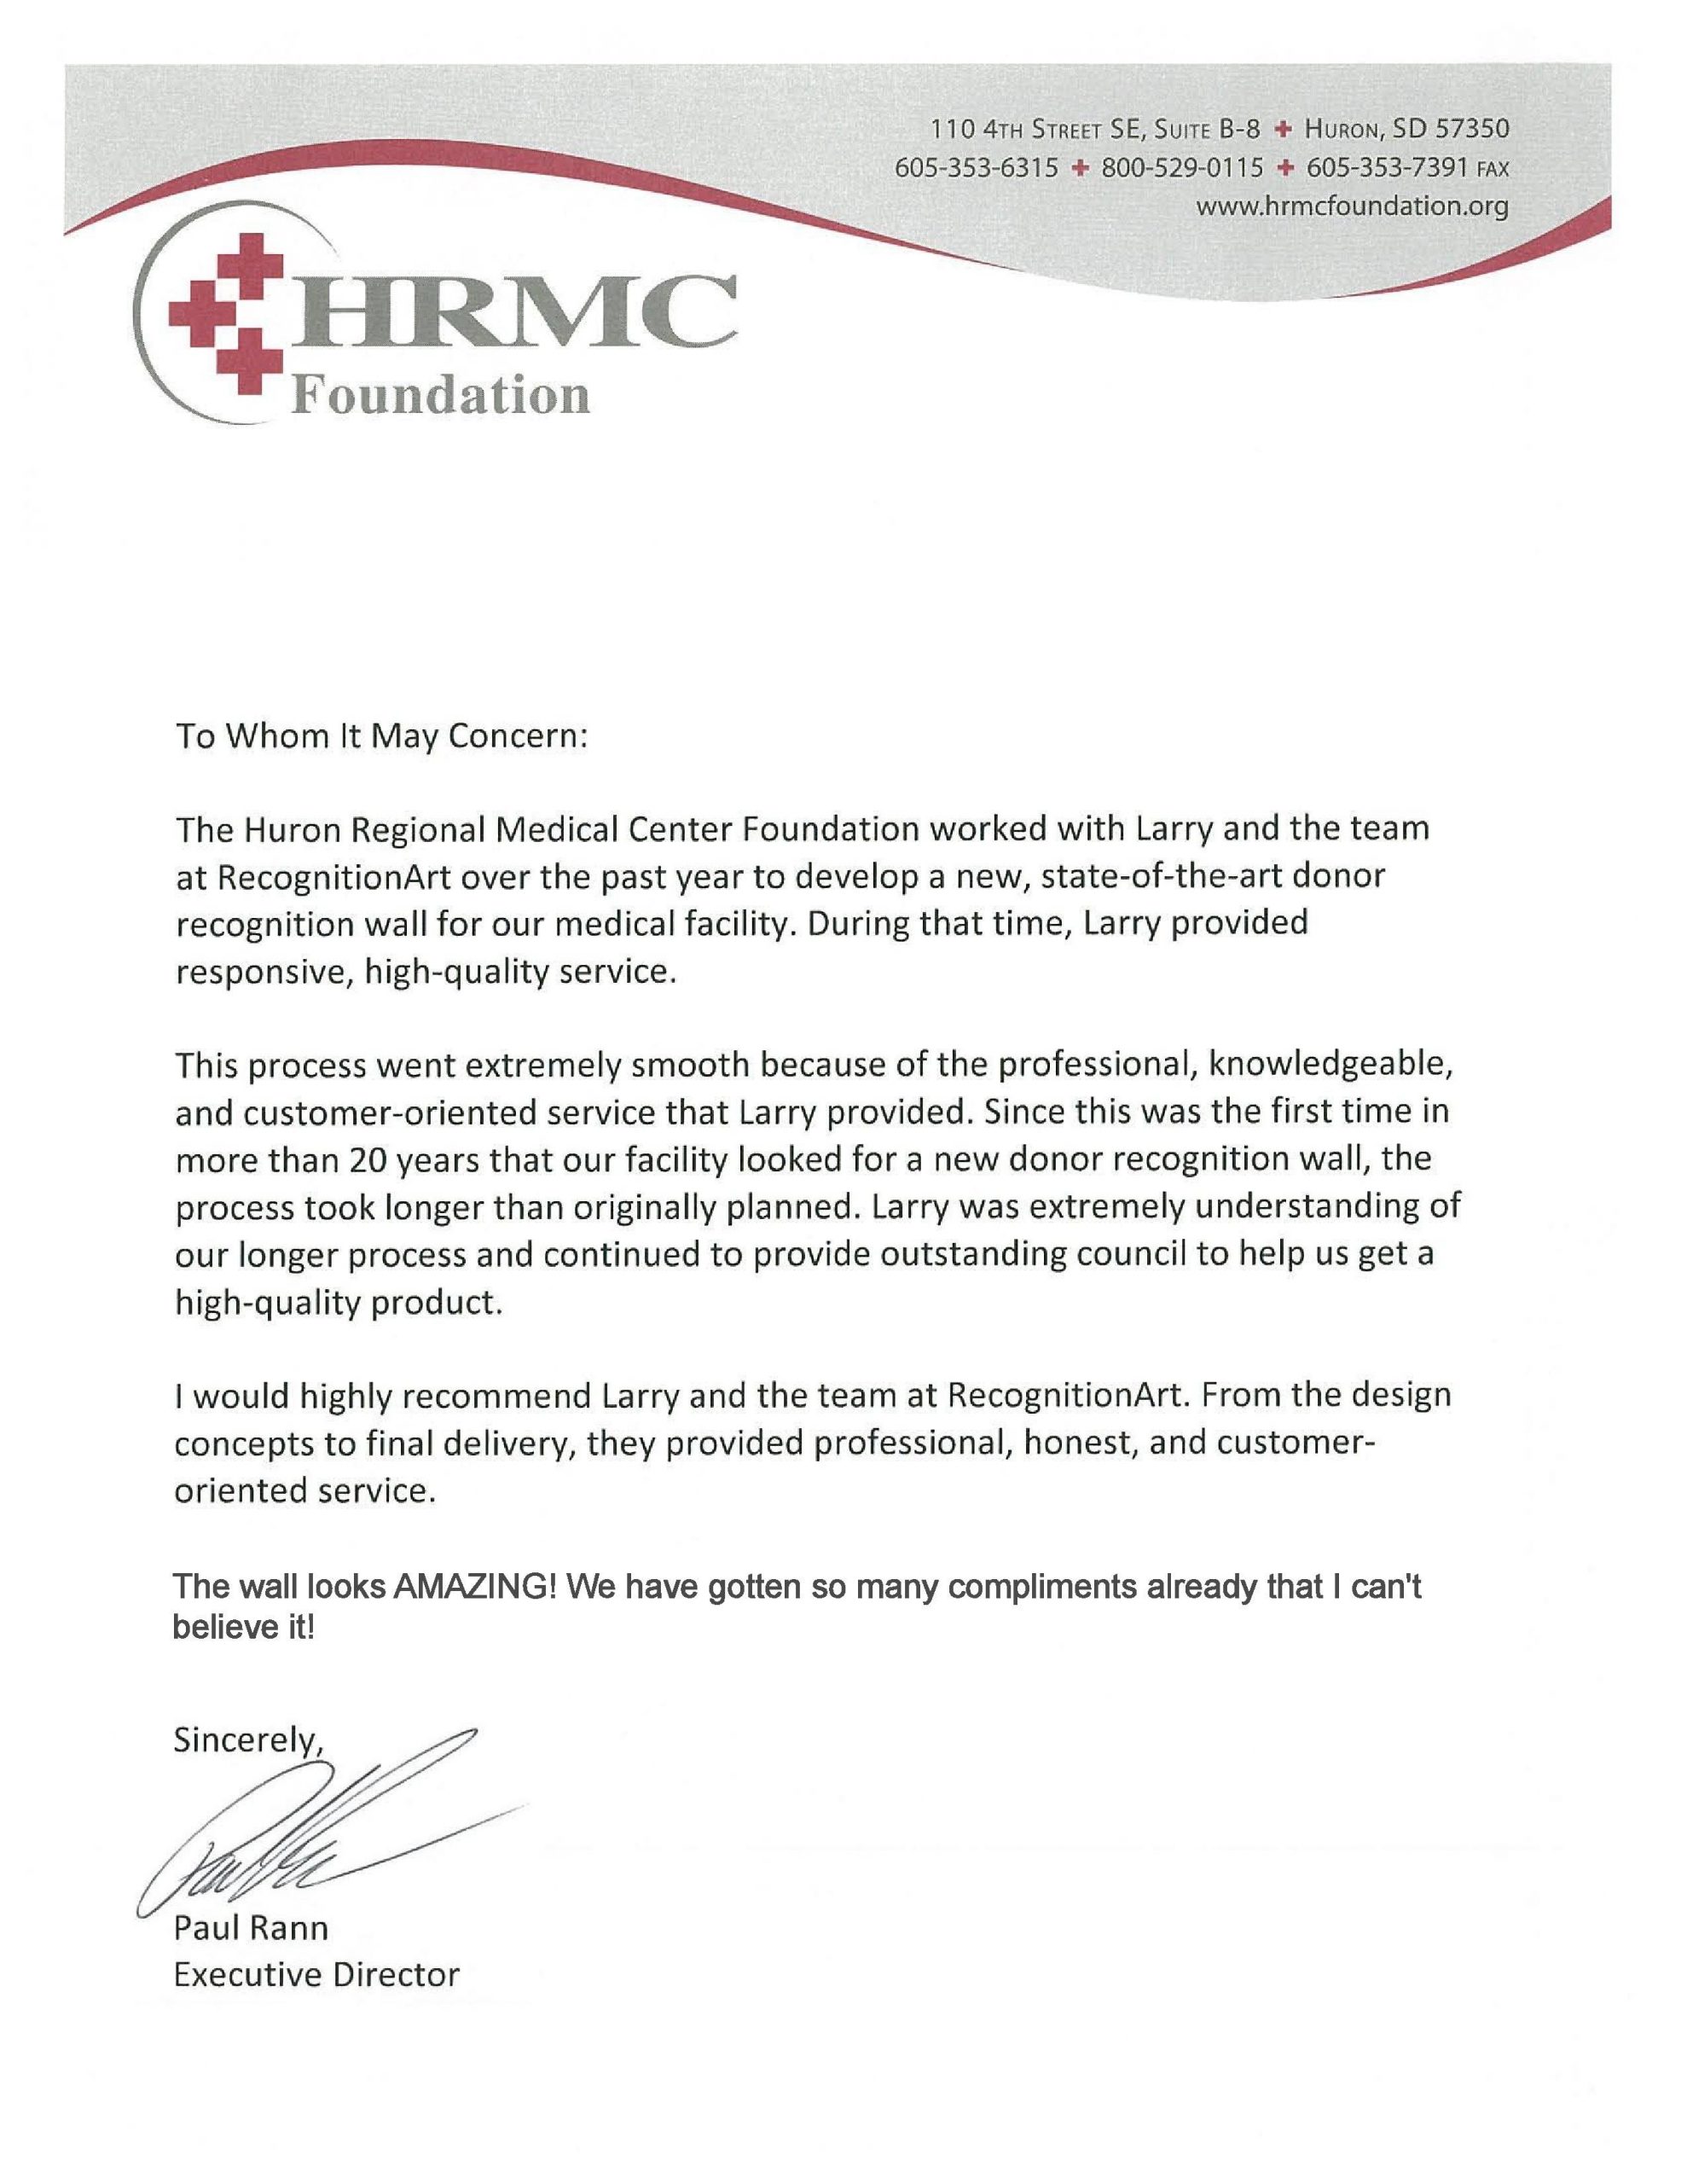 Letter Of Recommendation Hrmc Donordisplay in dimensions 2550 X 3300